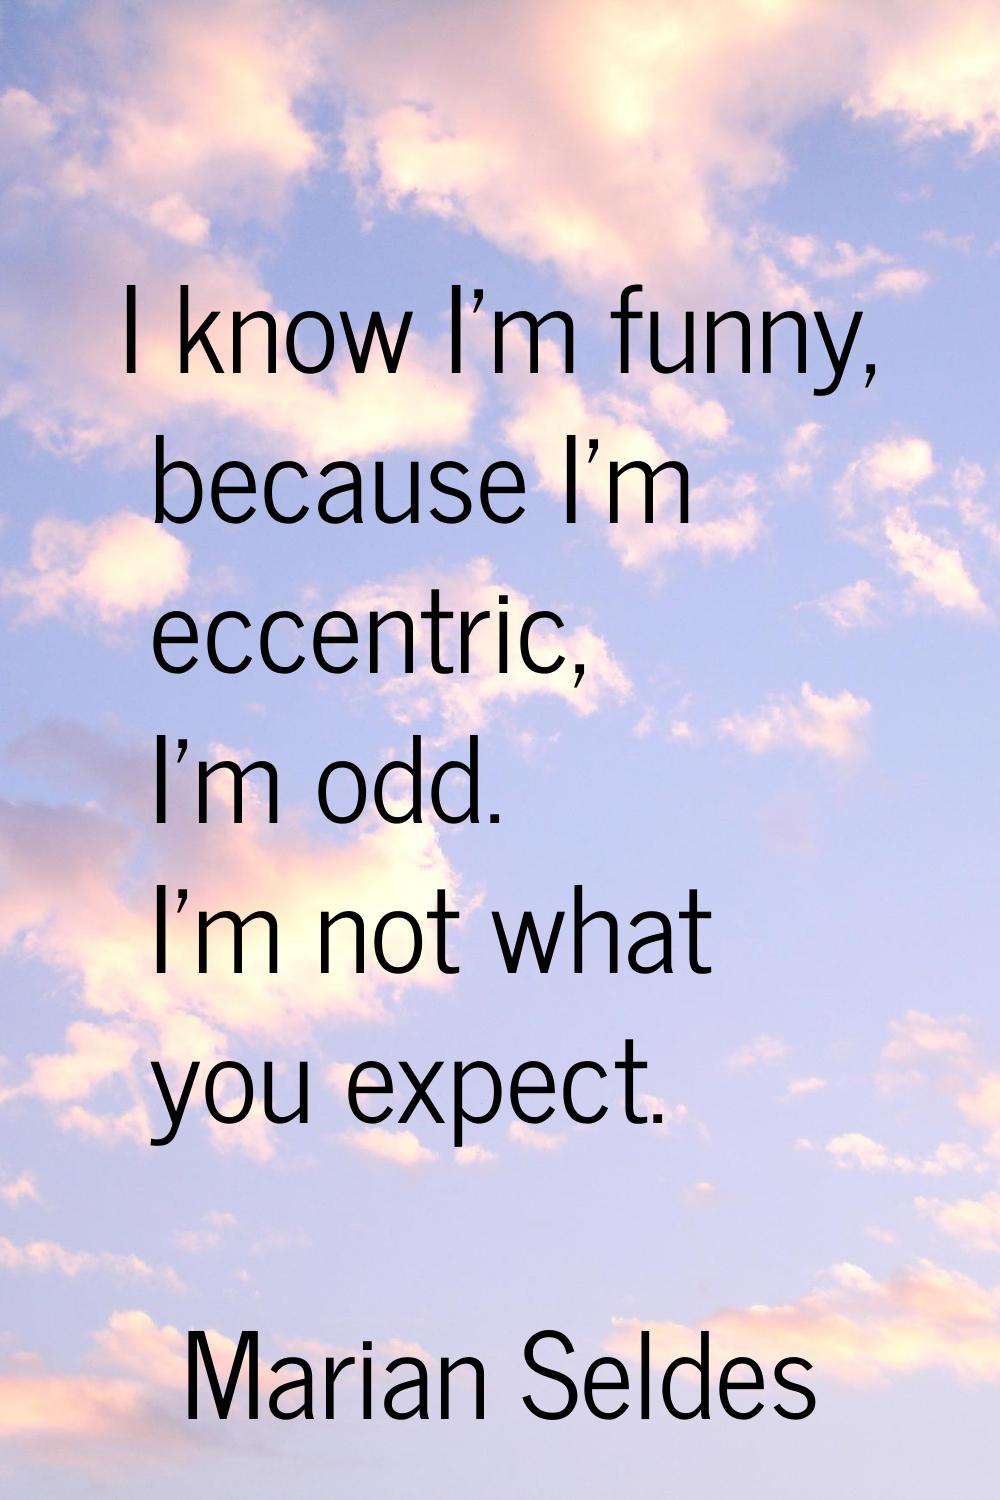 I know I'm funny, because I'm eccentric, I'm odd. I'm not what you expect.